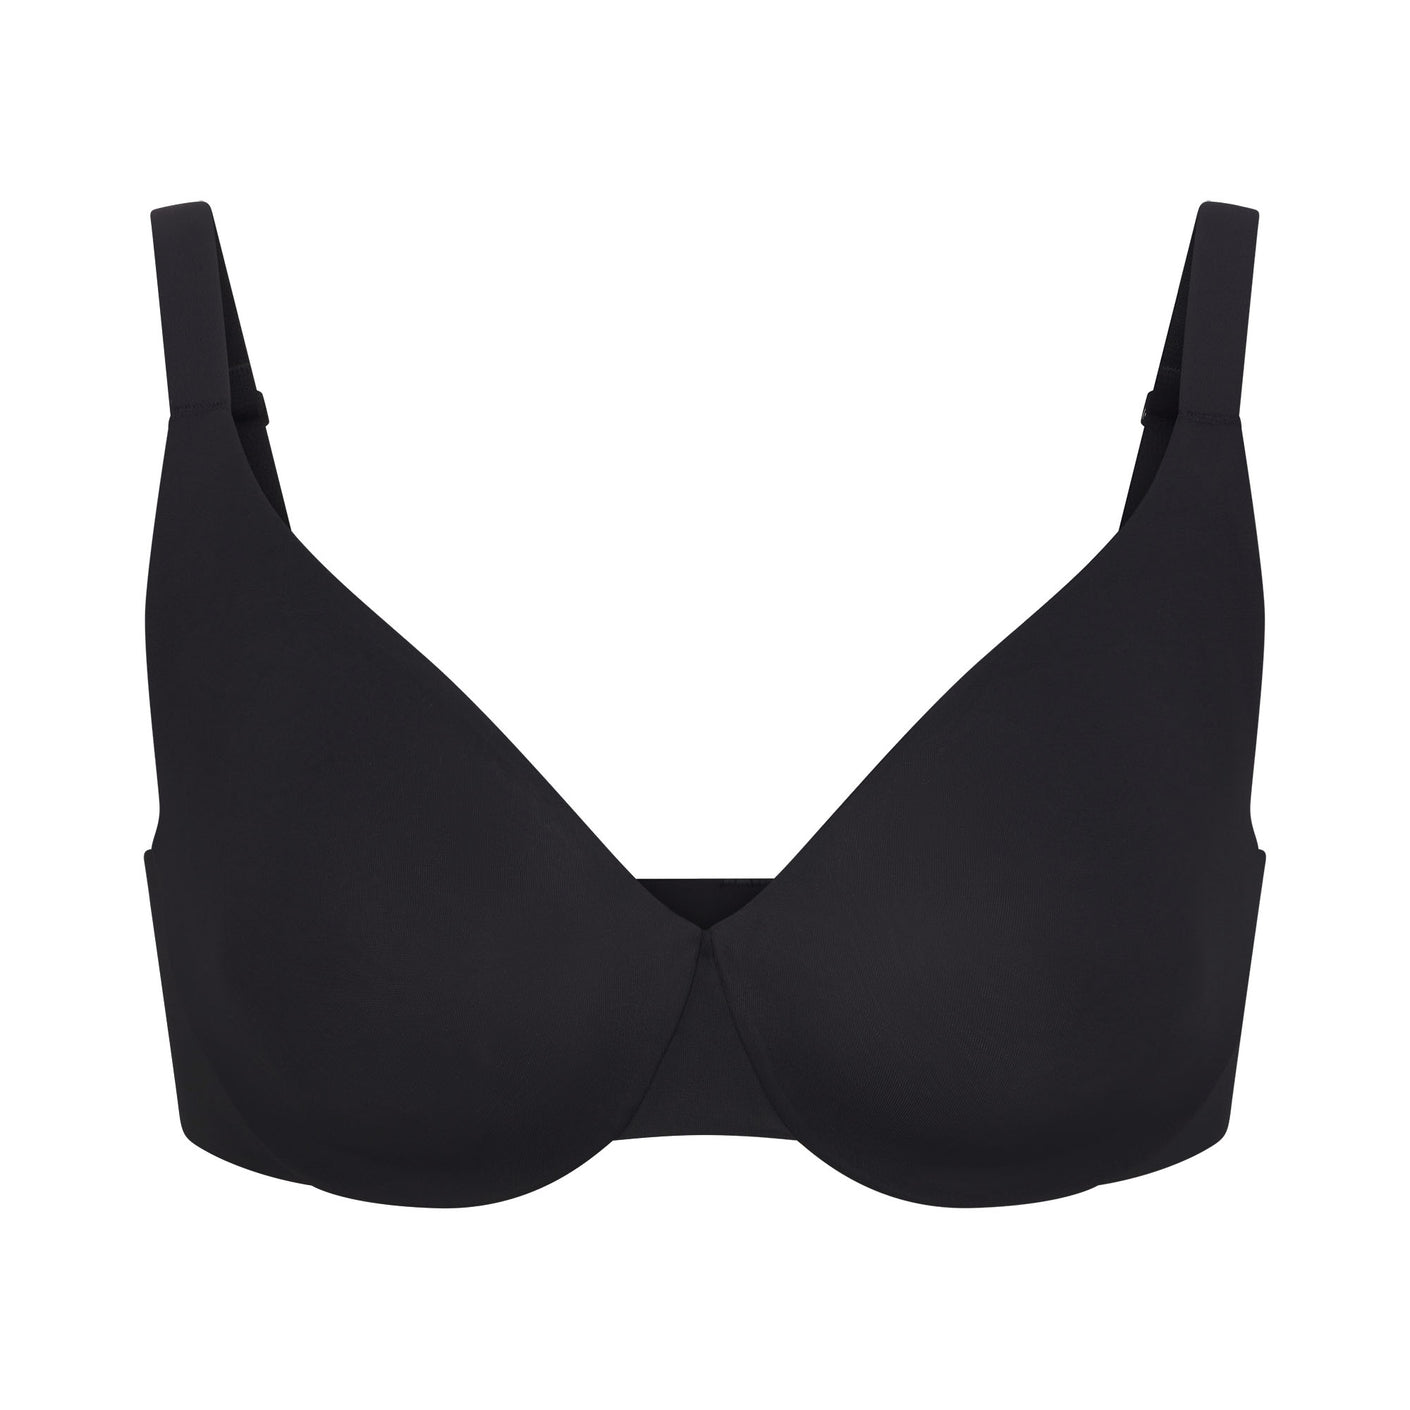 SKIMS Mesh Underwire Bra in Onyx 38A Size 38 A - $60 New With Tags - From  Matilda